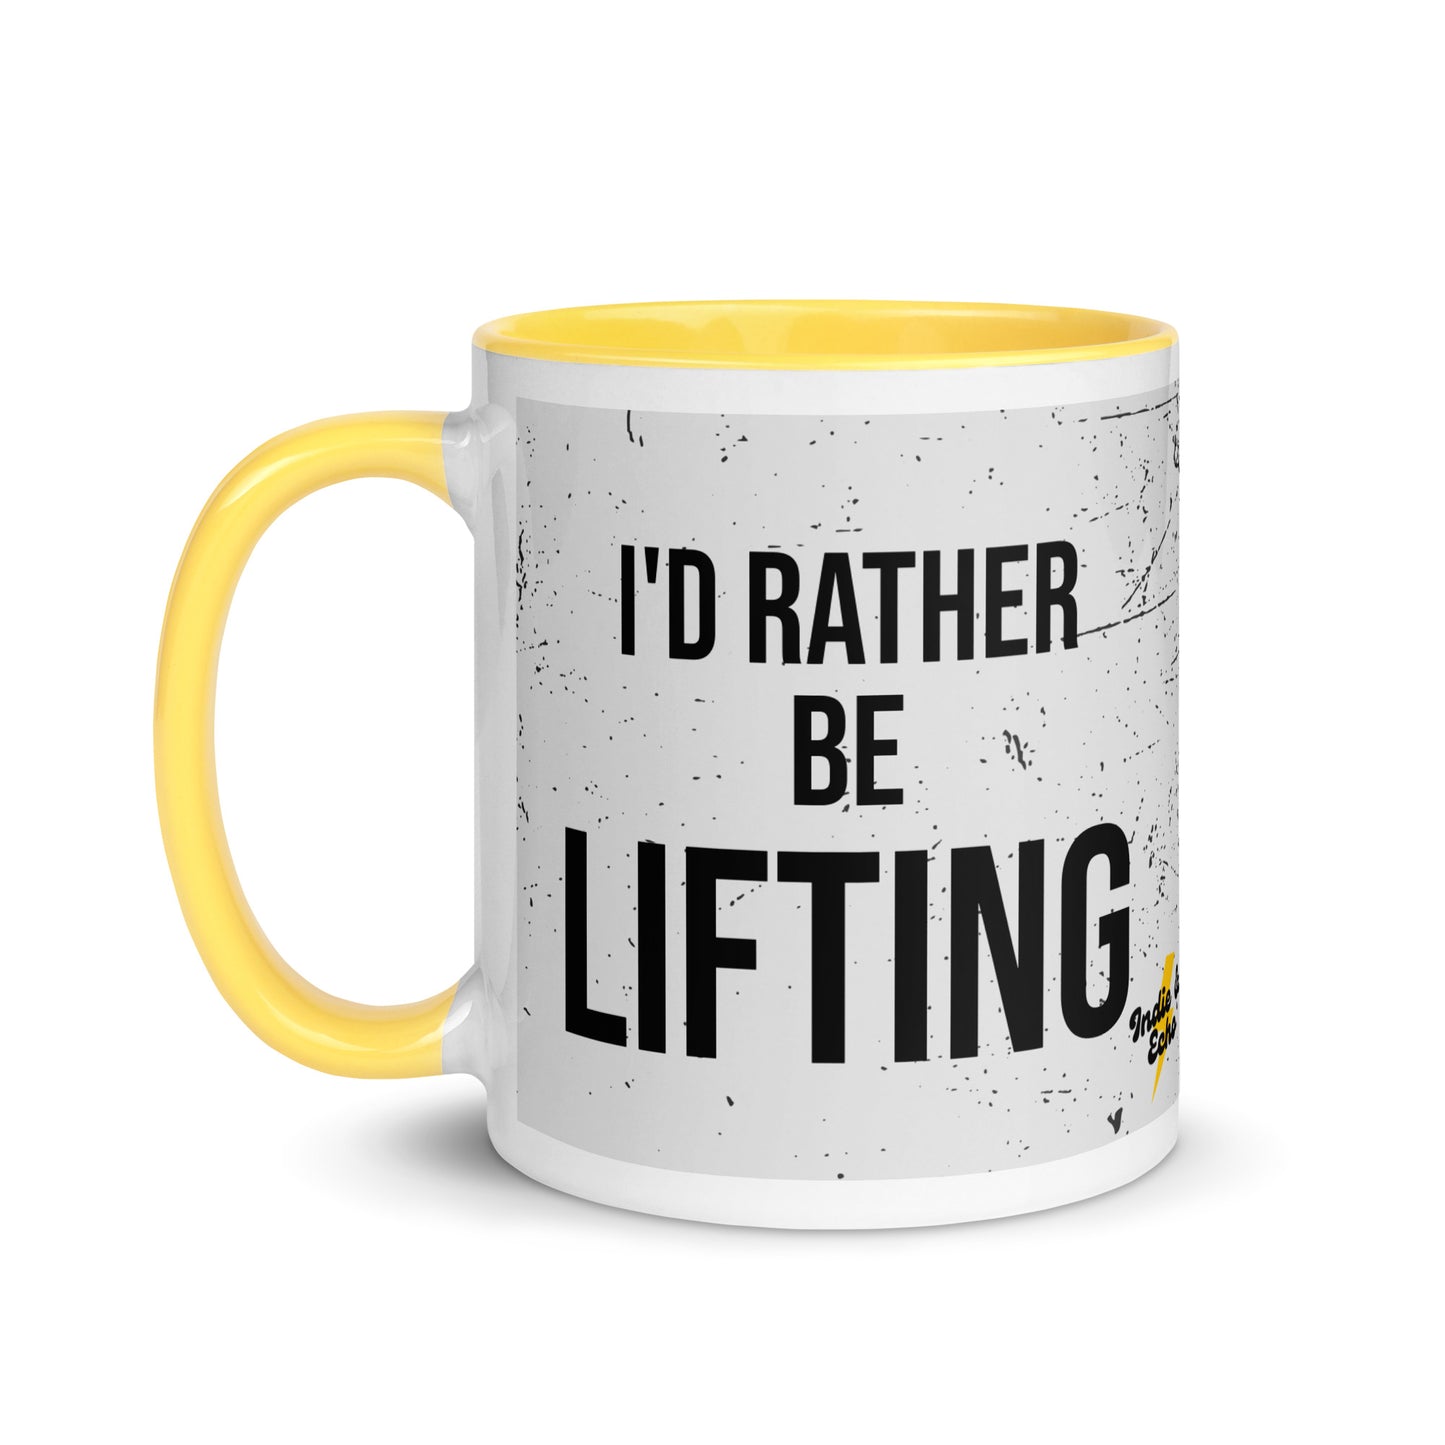 Yellow handled mug with I'd rather be lifting written on it, across a grey splatter background. A gift for someone who loves the gym.